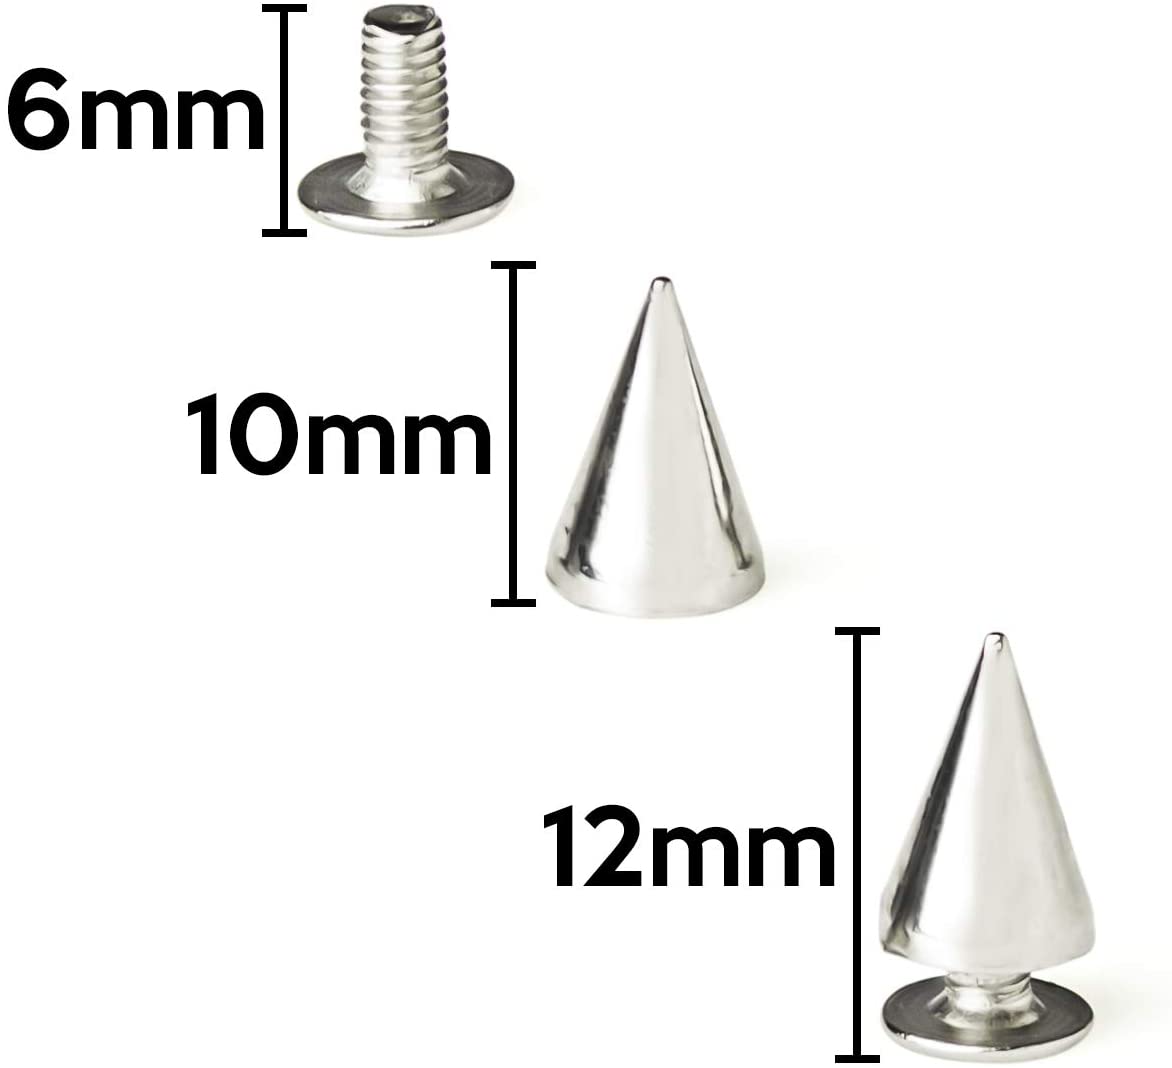 Bastex 205pcs Studs and Spikes. Metal Spikes and Punk Studs for Clothing,  Jacket Studs. Cone Small Metal Studs and Metal Spikes for DIY Leather  Craft. Includes Bullet Cone Spike and Metal Screw